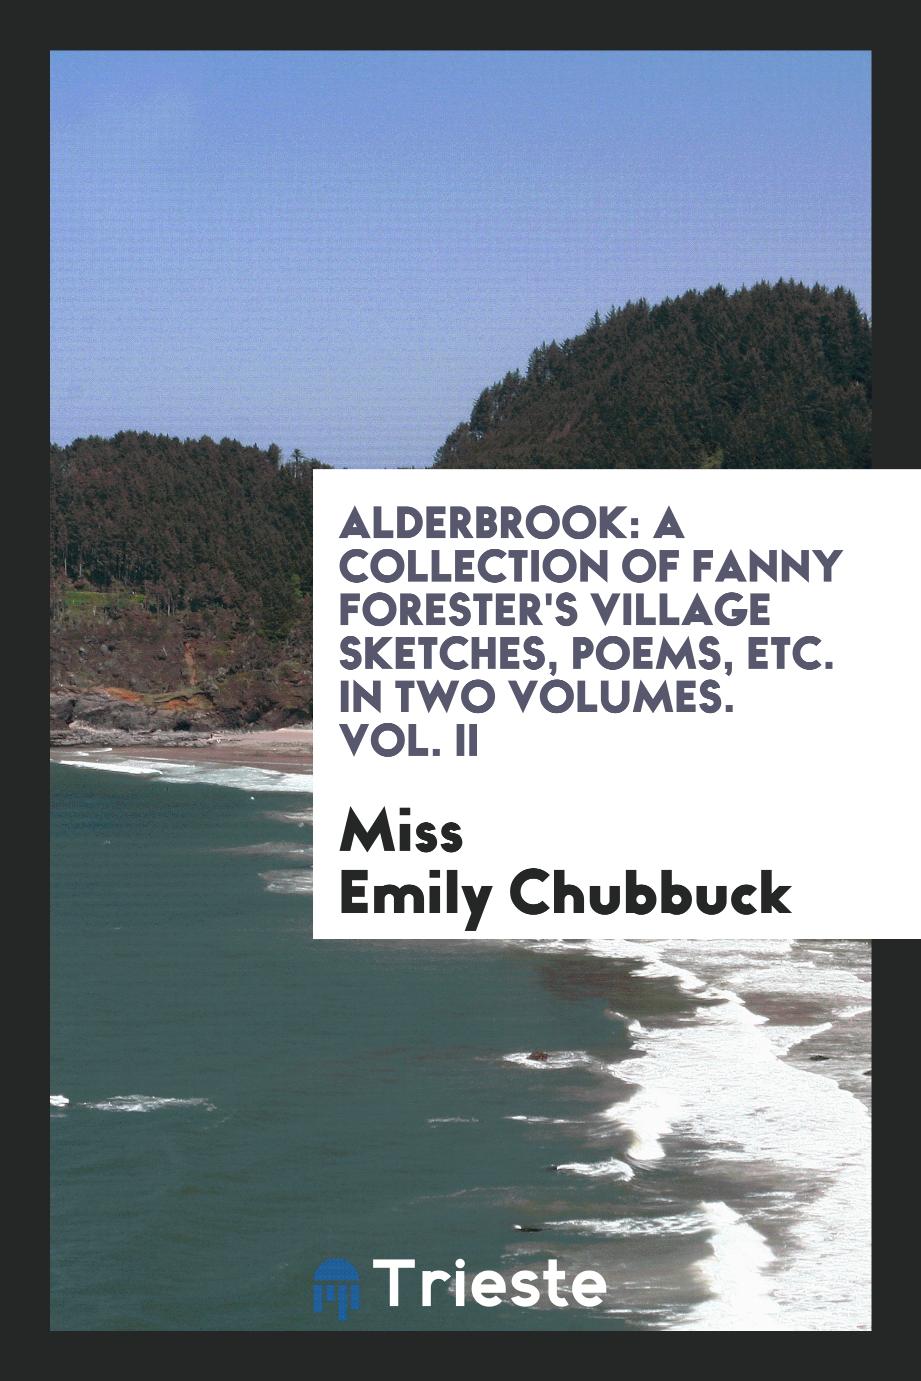 Alderbrook: A Collection of Fanny Forester's Village Sketches, Poems, Etc. In Two Volumes. Vol. II